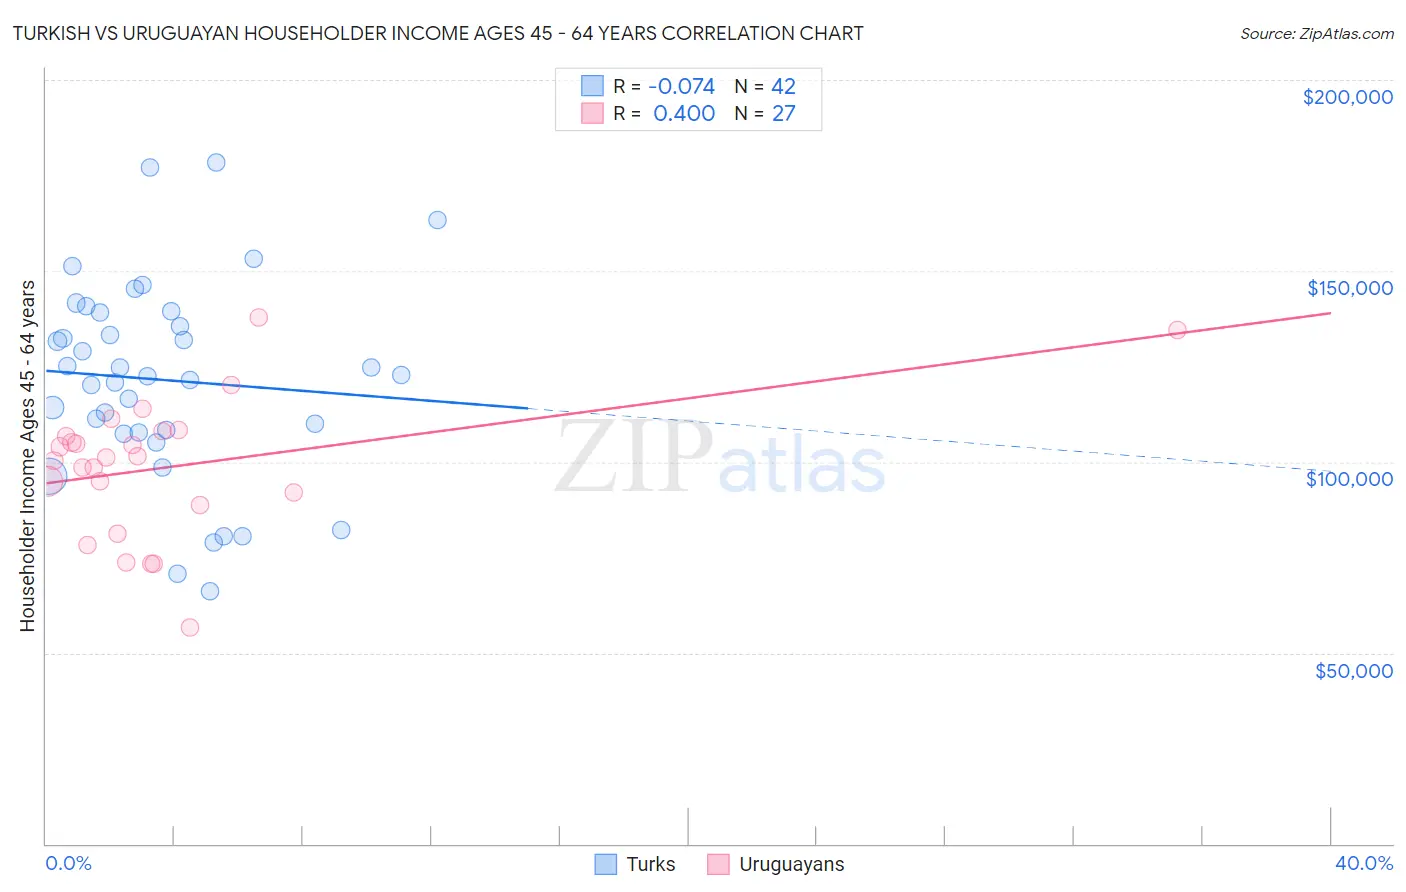 Turkish vs Uruguayan Householder Income Ages 45 - 64 years